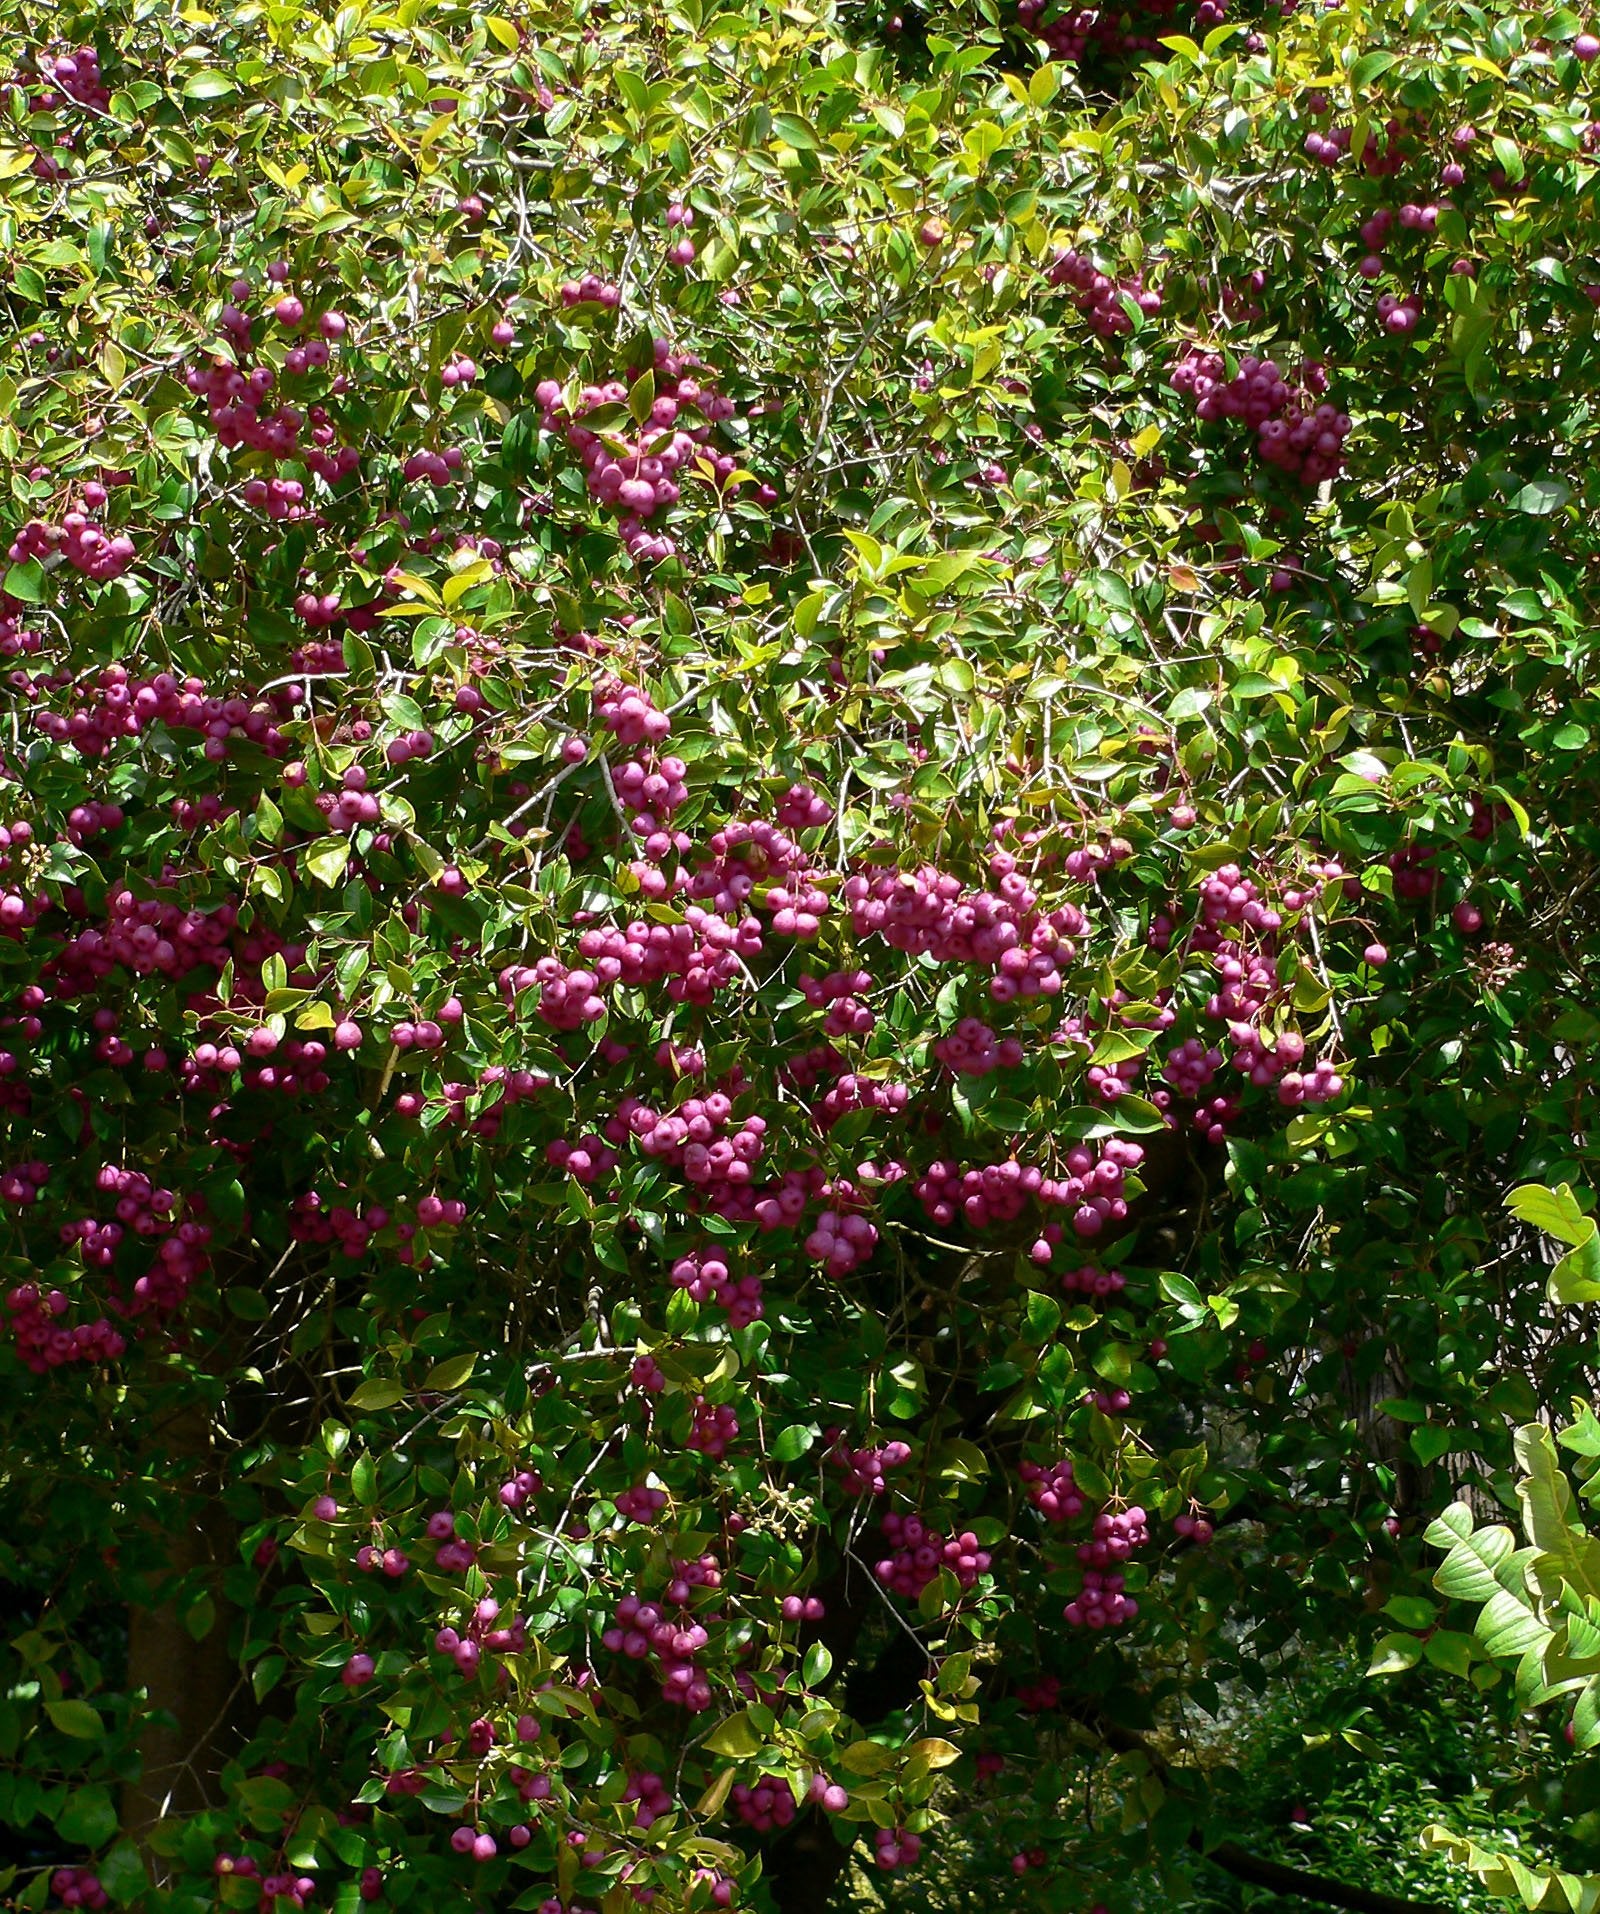 Lilly Pilly - Syzygium Australe